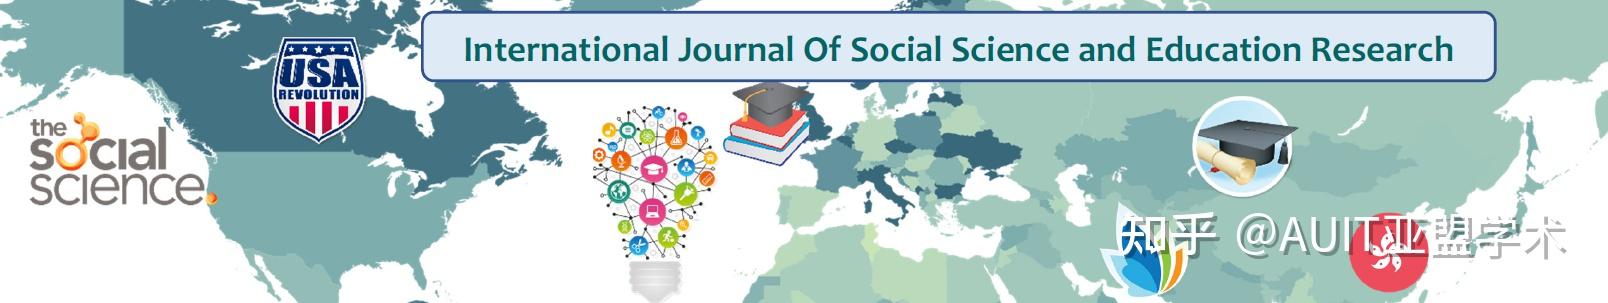 the american journal of social science and education innovations